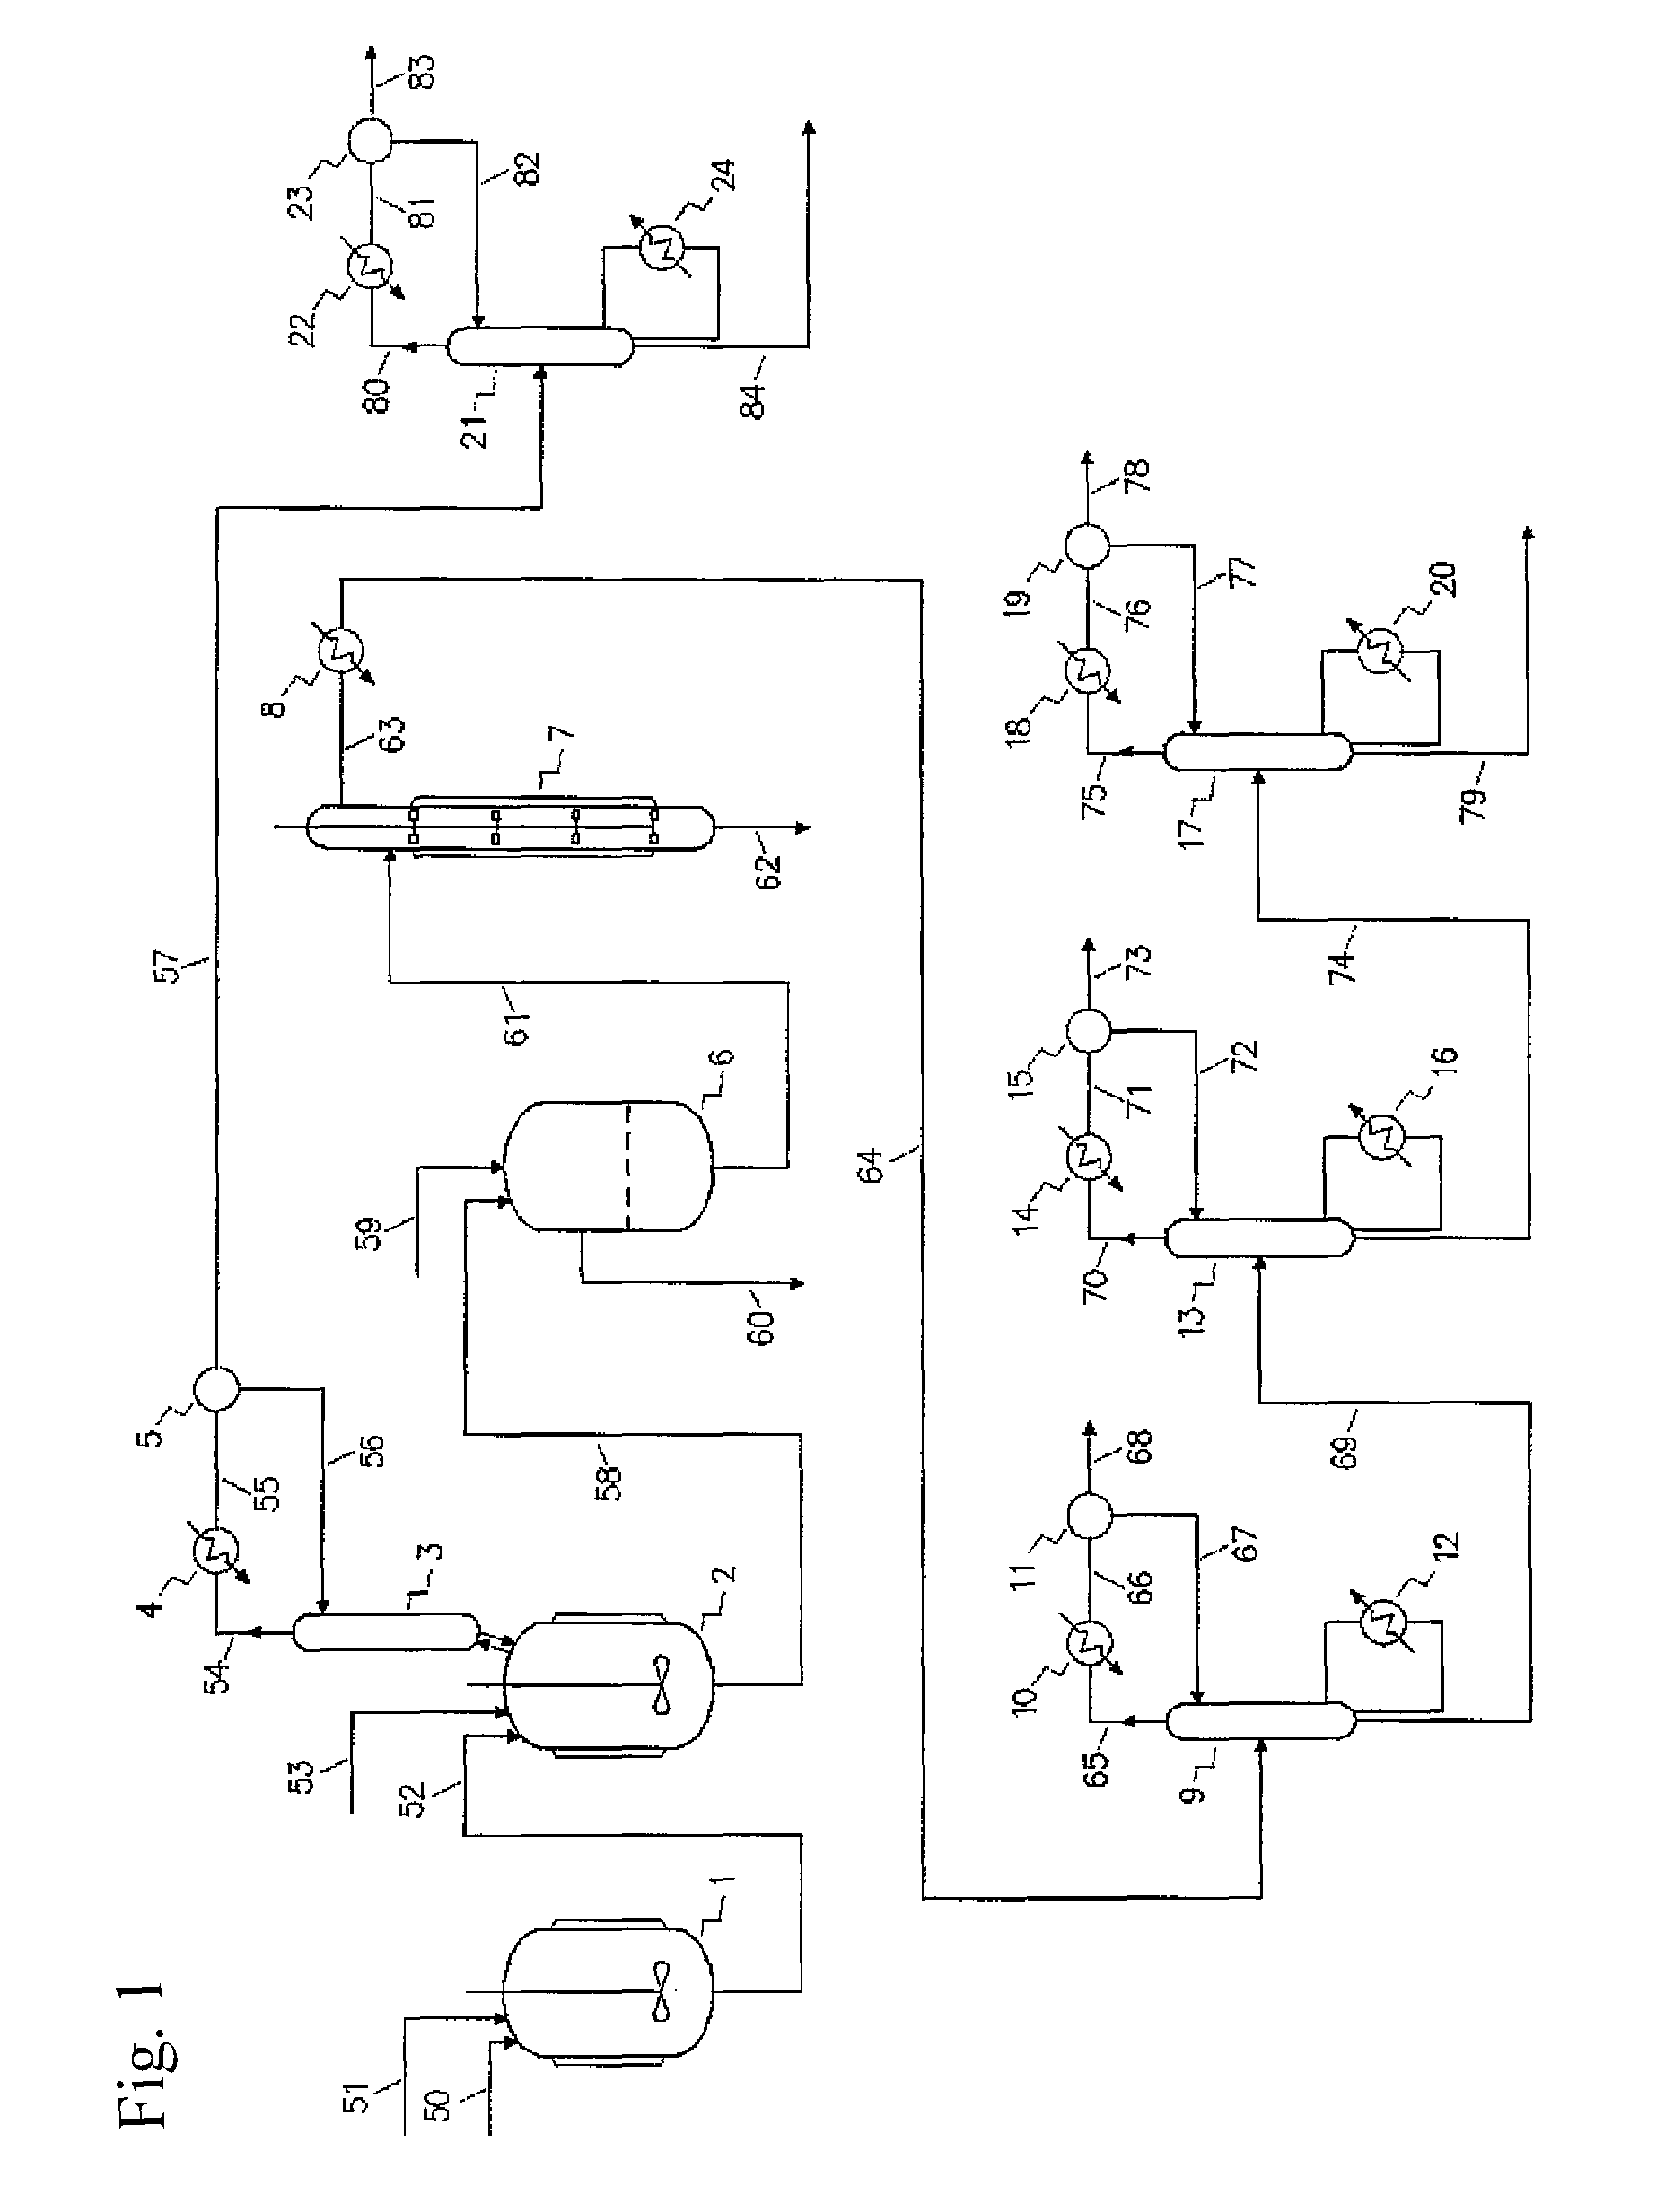 Process for the manufacture of epoxy-monomers and epoxides